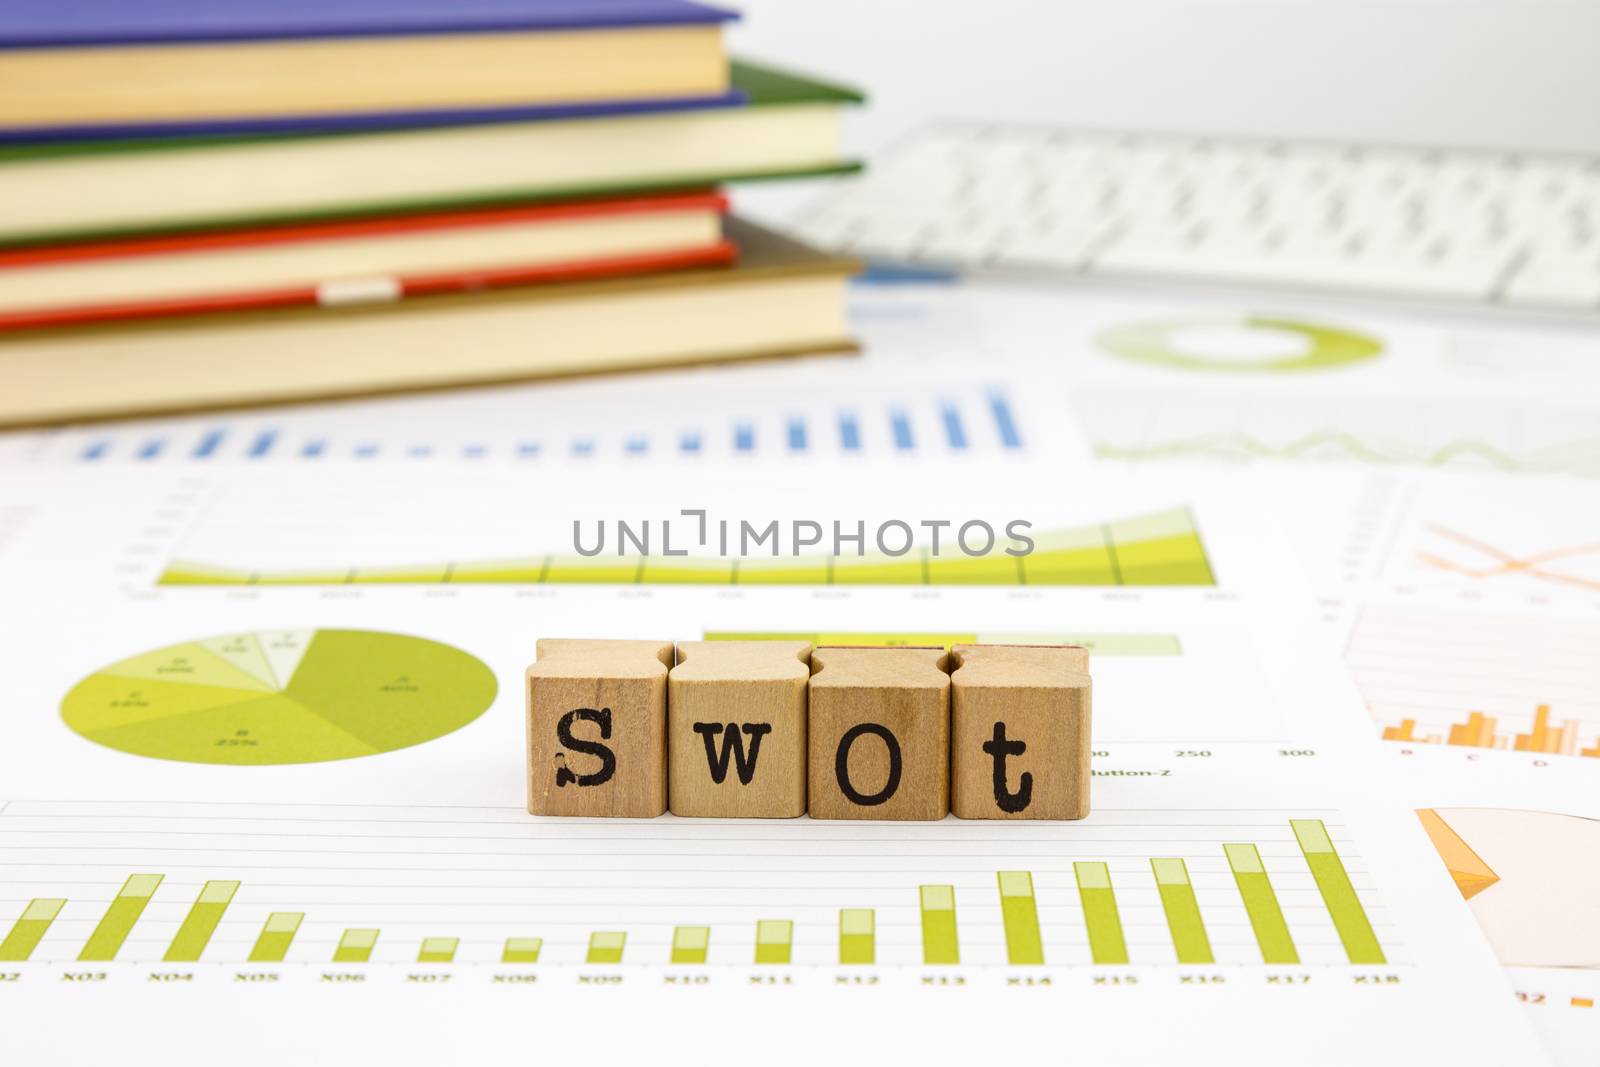 SWOT word on rubber stamps place on graph analysis of business reports concept to evaluate and planning projects